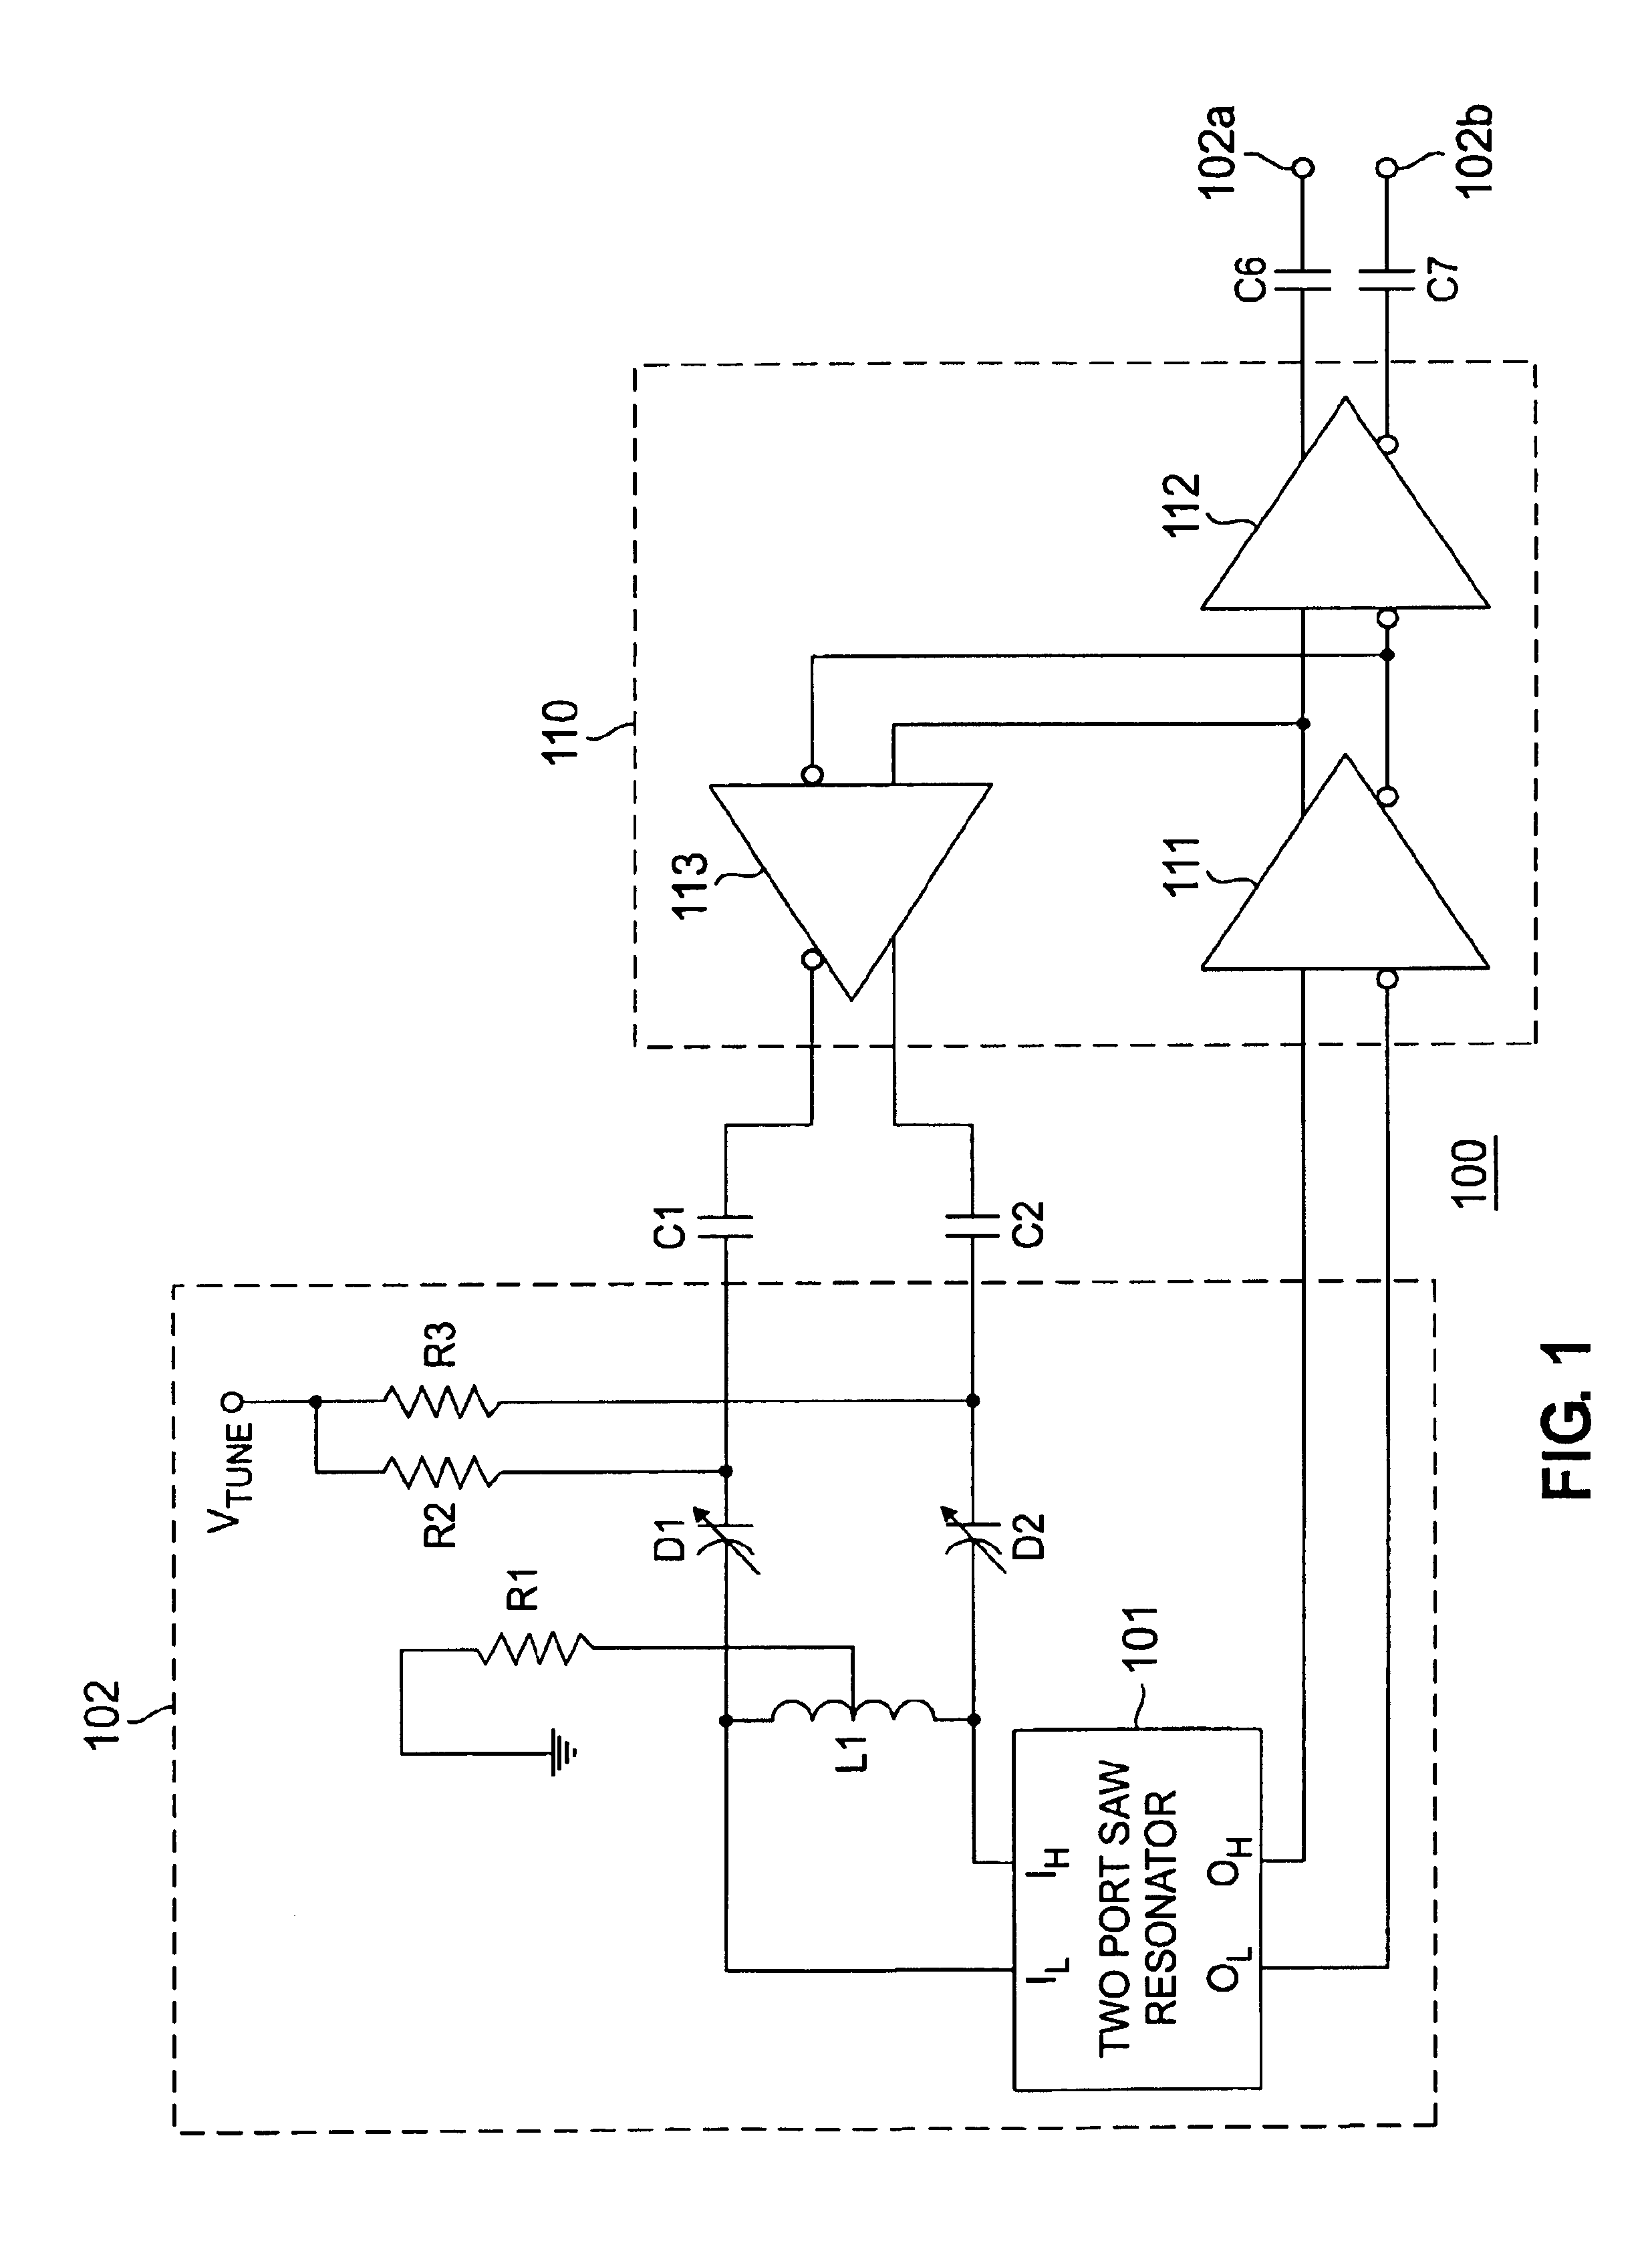 Noise resistant low phase noise, frequency tracking oscillators and methods of operating the same